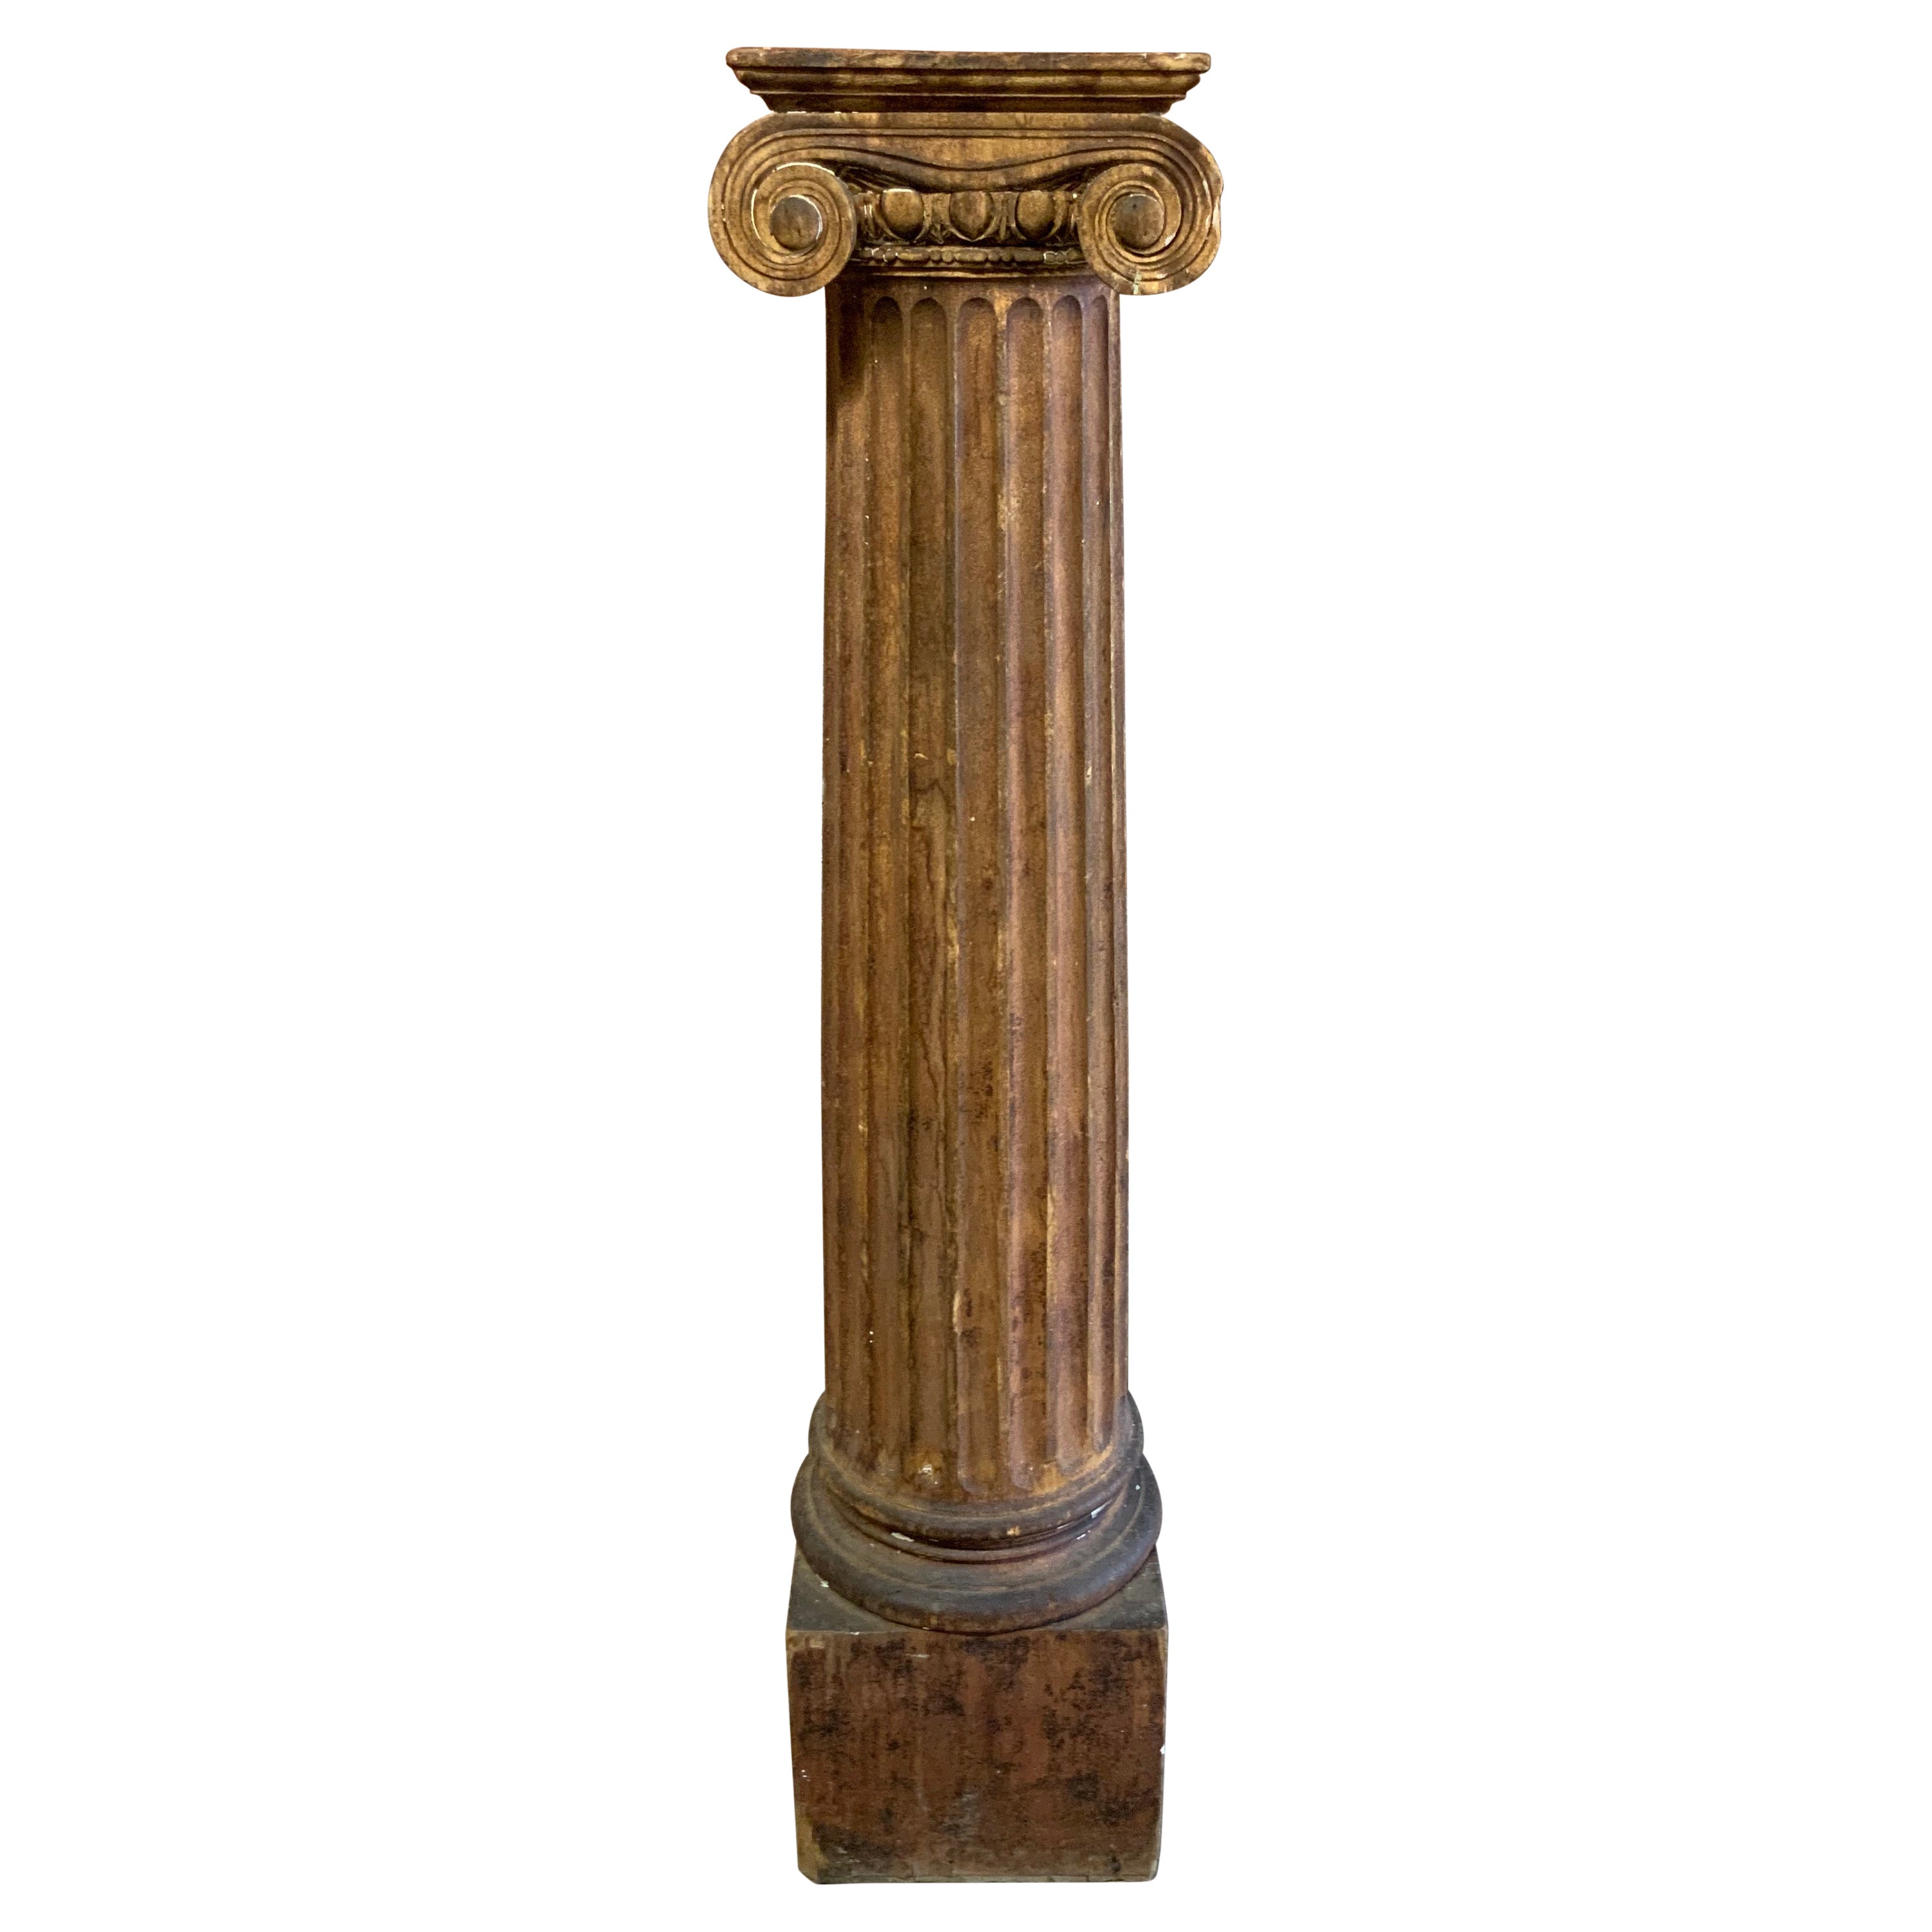 Carved Victorian Era Wood Fluted Ionic Column